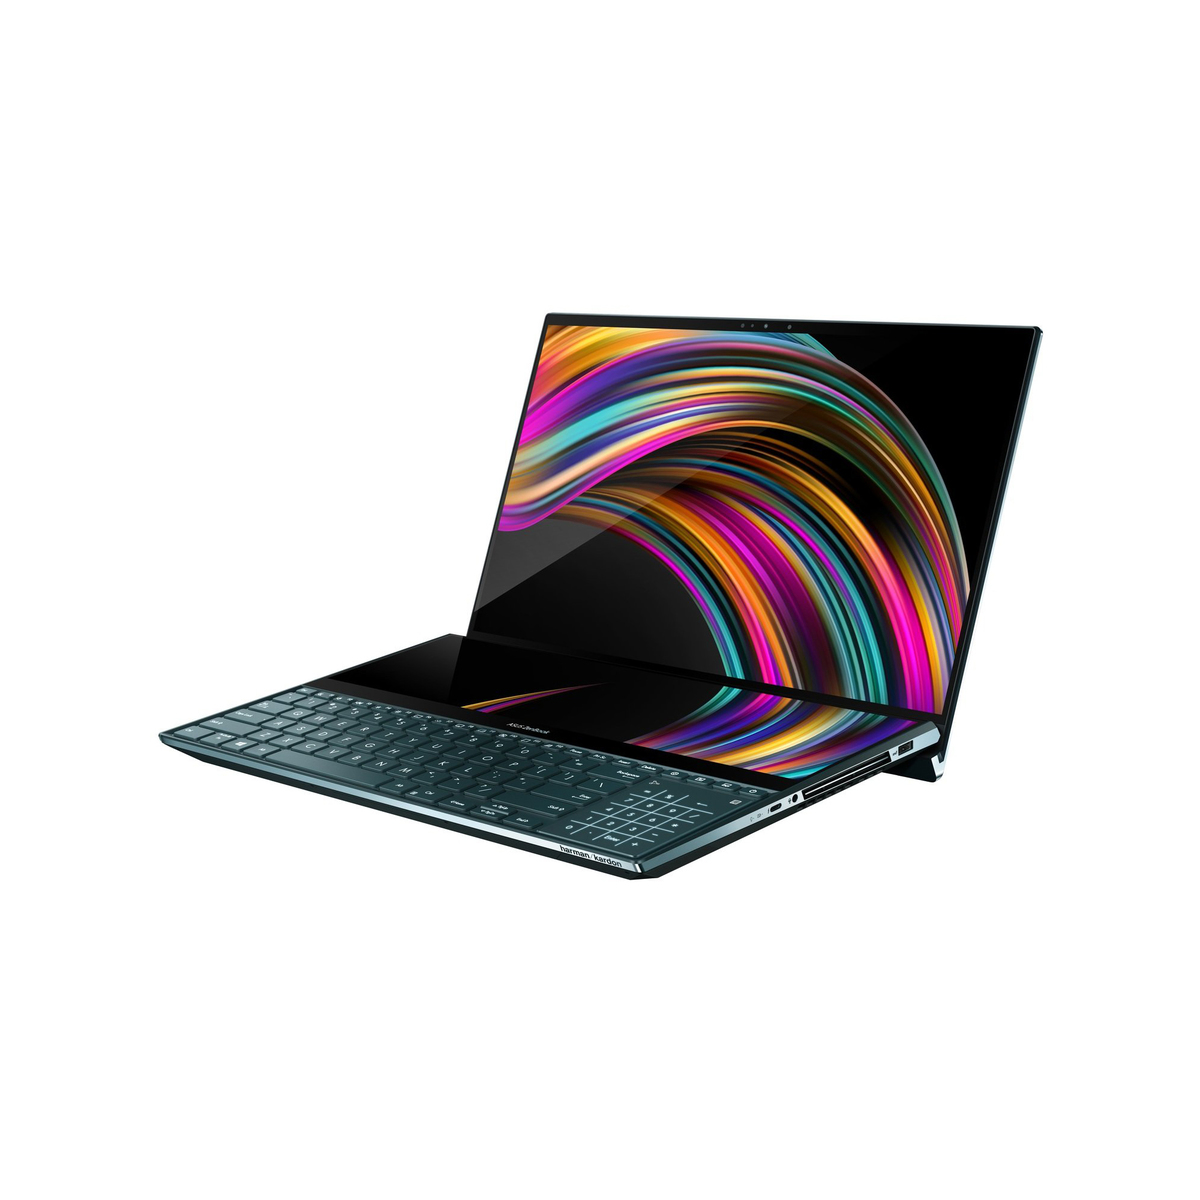 Asus ZenBook Pro Duo UX581GV-H2001TS Laptop (Celestial Blue)- Intel i9-9980HK 5.0 GHz, 32GB RAM, 1TB SSD, Nvidia GeForce RTX 2060(6GB GDDR6), 15.6 inches 4K UHD OLED Touch, Windows 10